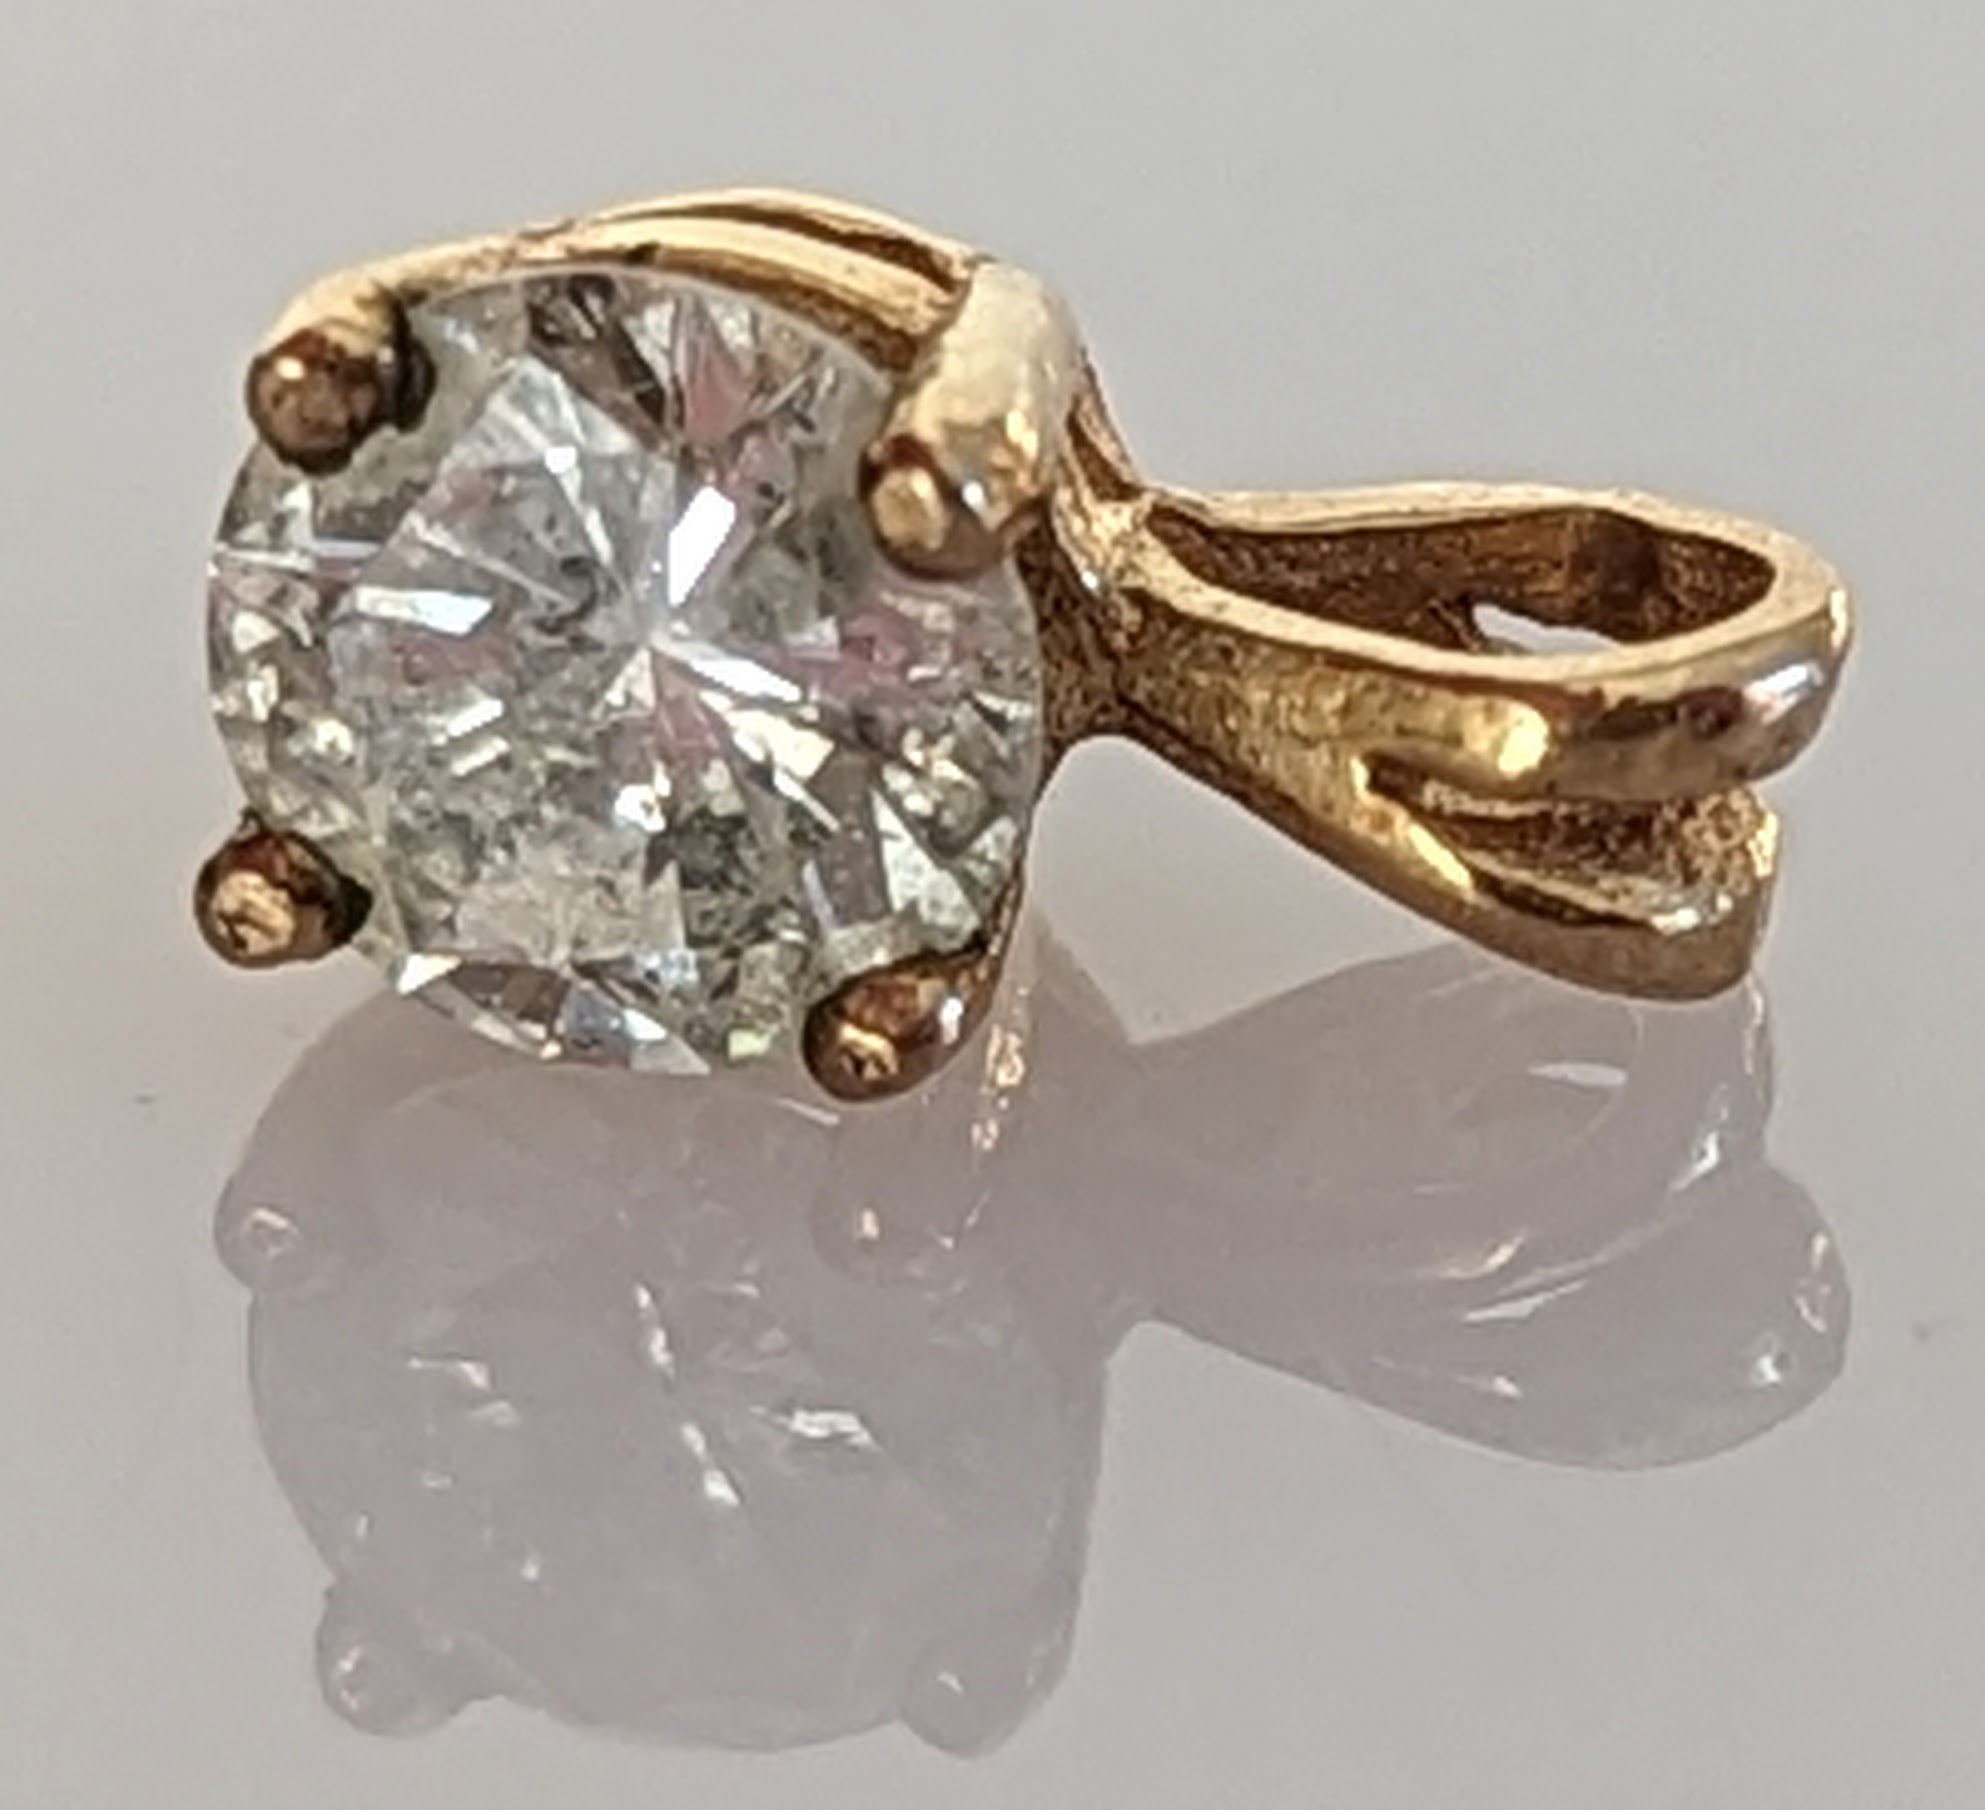 A solitaire diamond ring with split shoulder shank, decorated with diamonds to both sides - Image 5 of 8